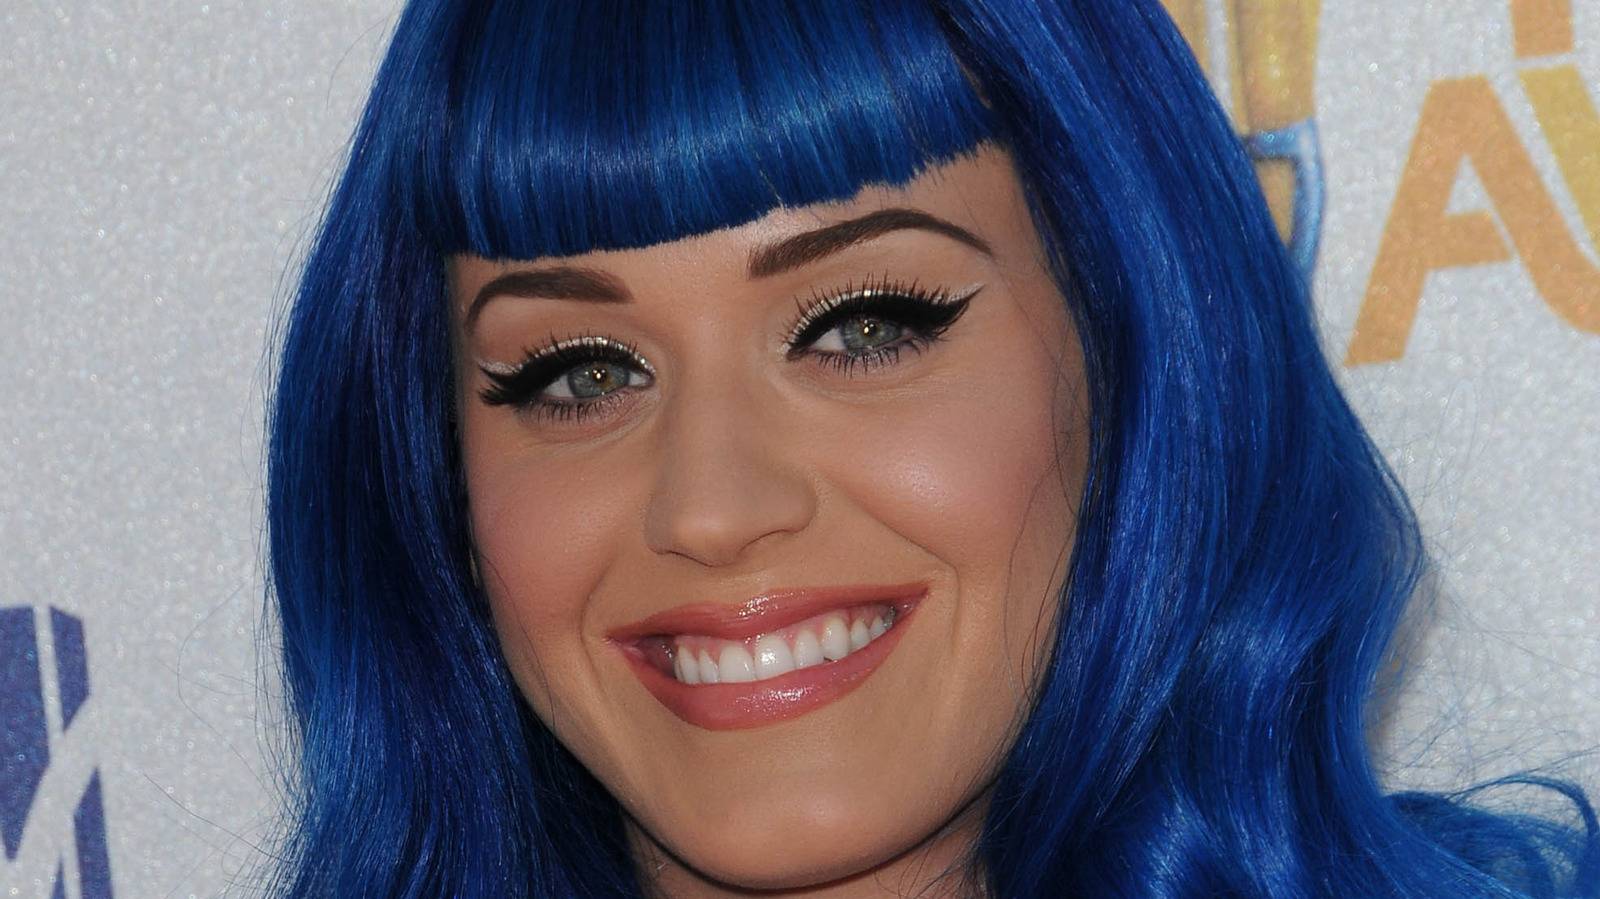 Katy Perry's Blue Hair Evolution: From Icy Blonde to Bold Blue - wide 8